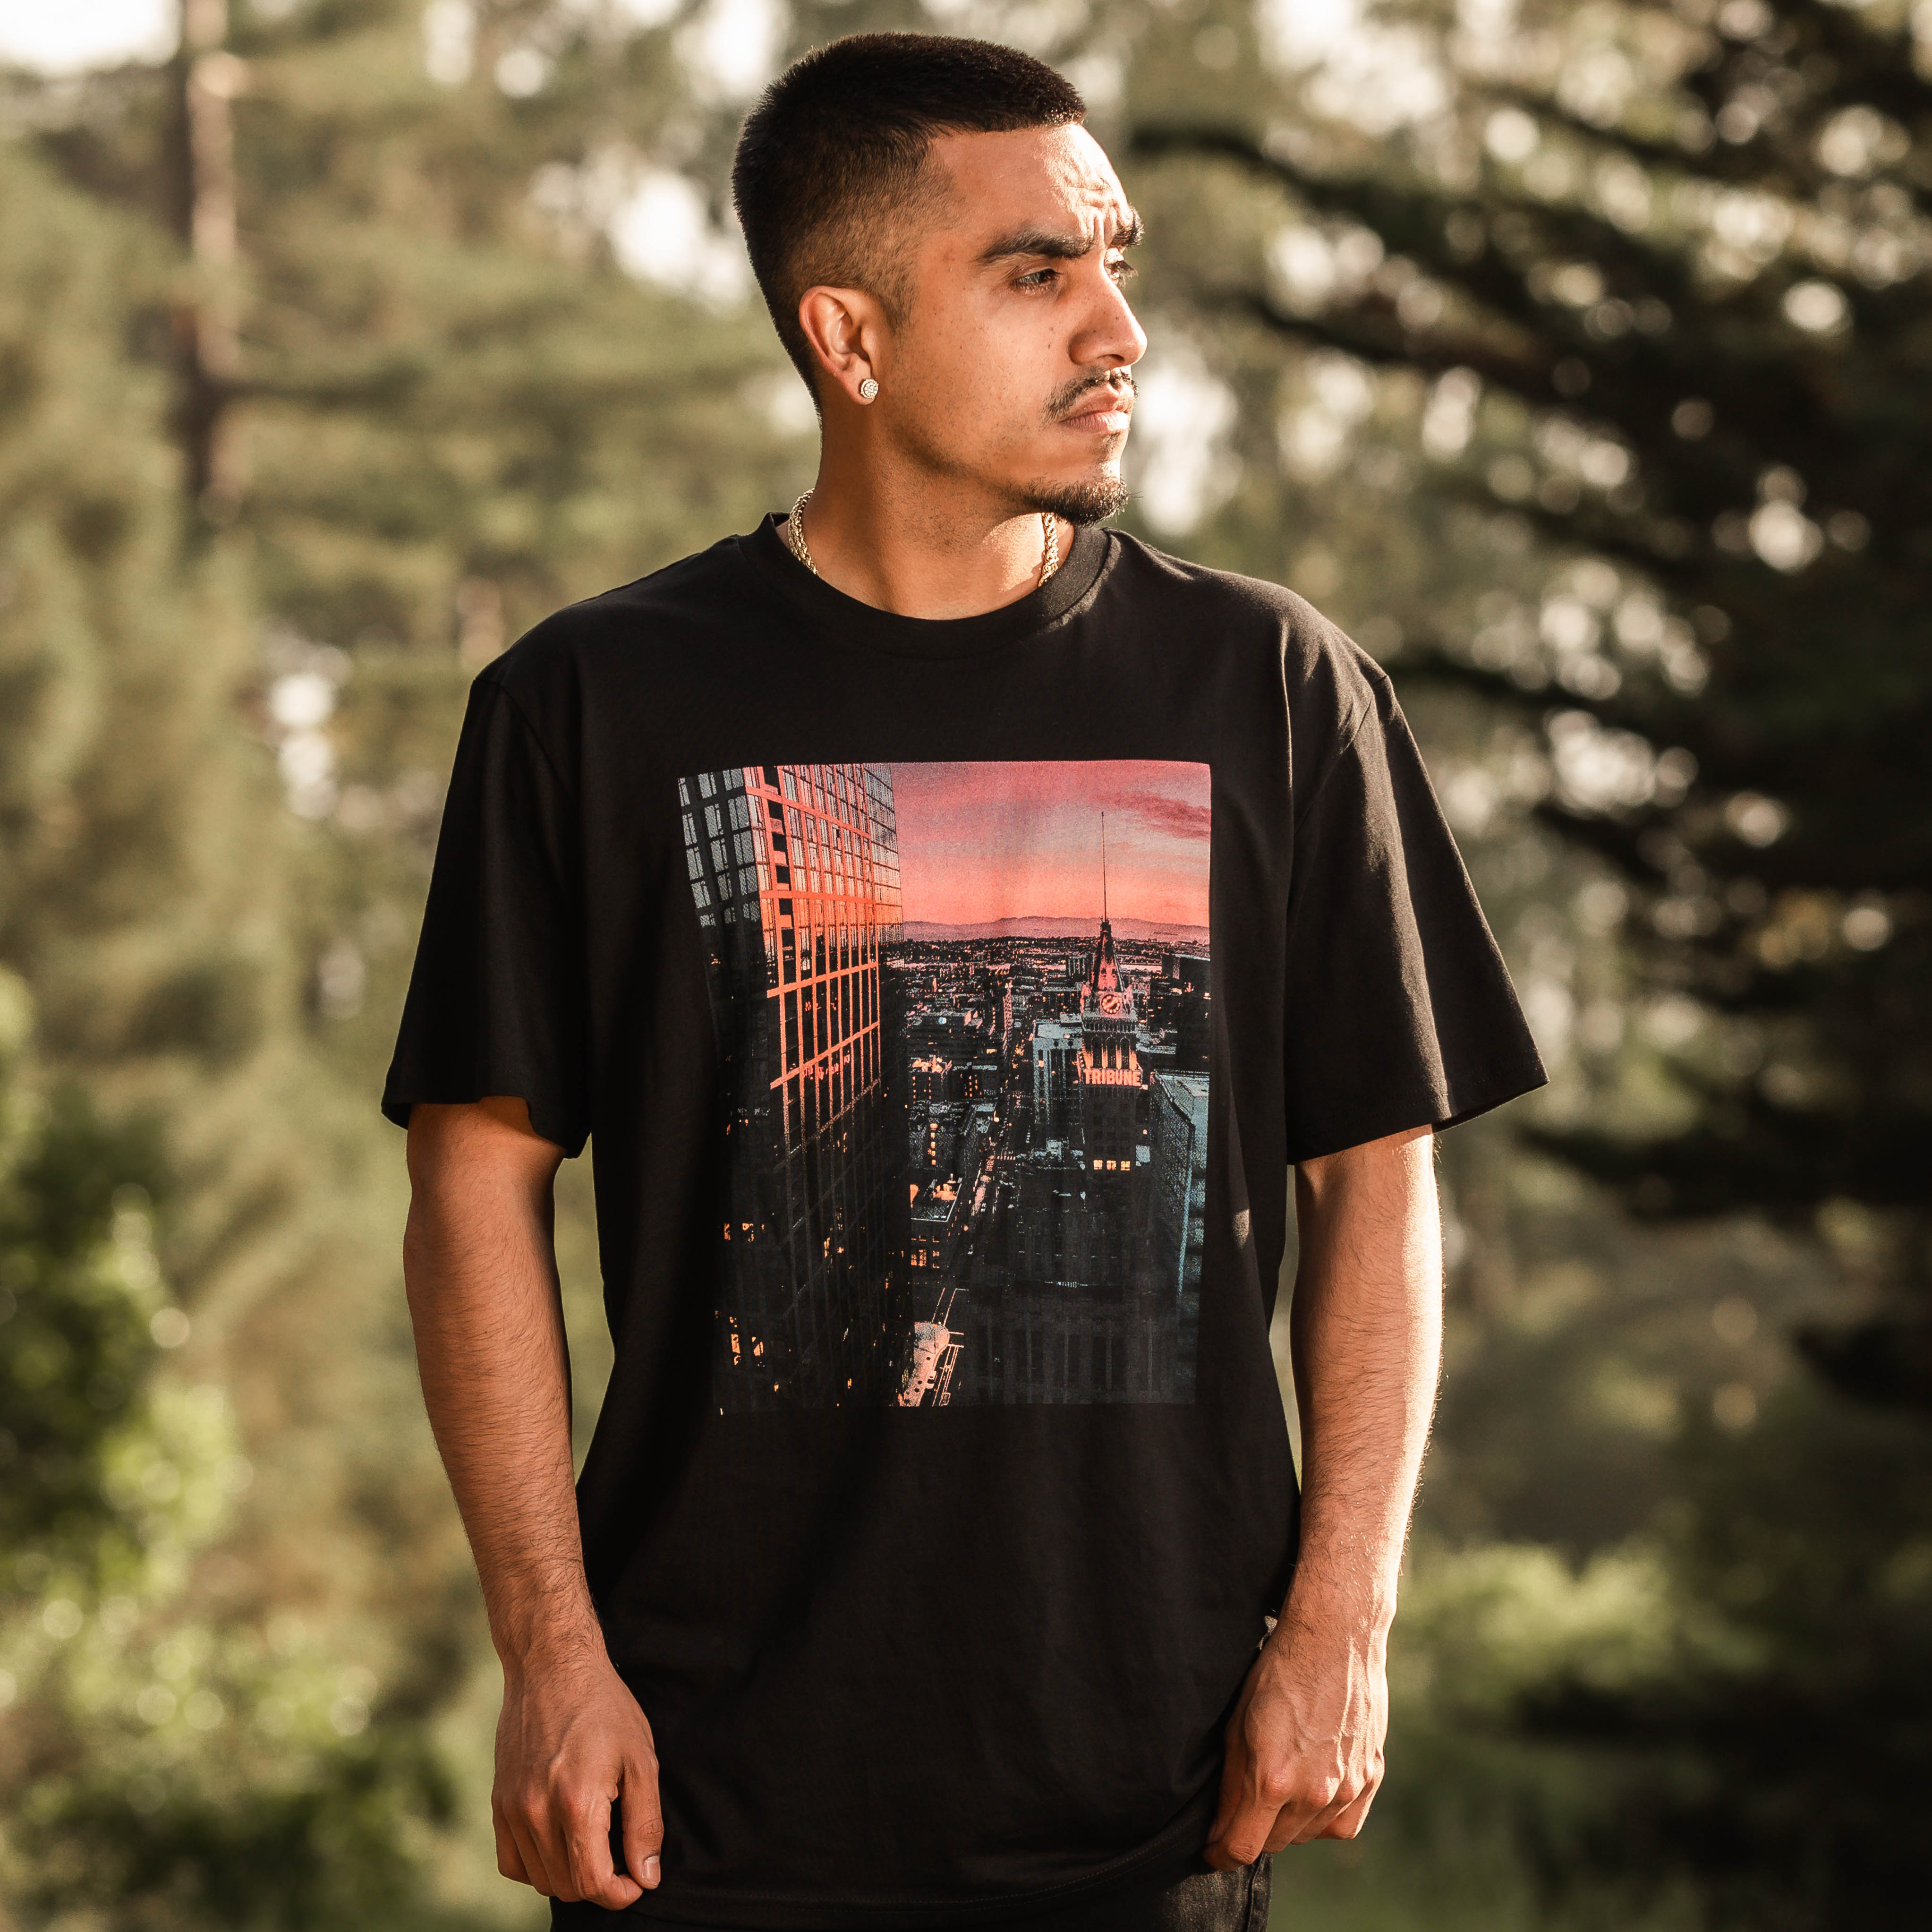 Man standing outdoors wearing black tee with Vincent James photography image of the Oakland Tribune building and the Downtown Oakland landscape at sunset.